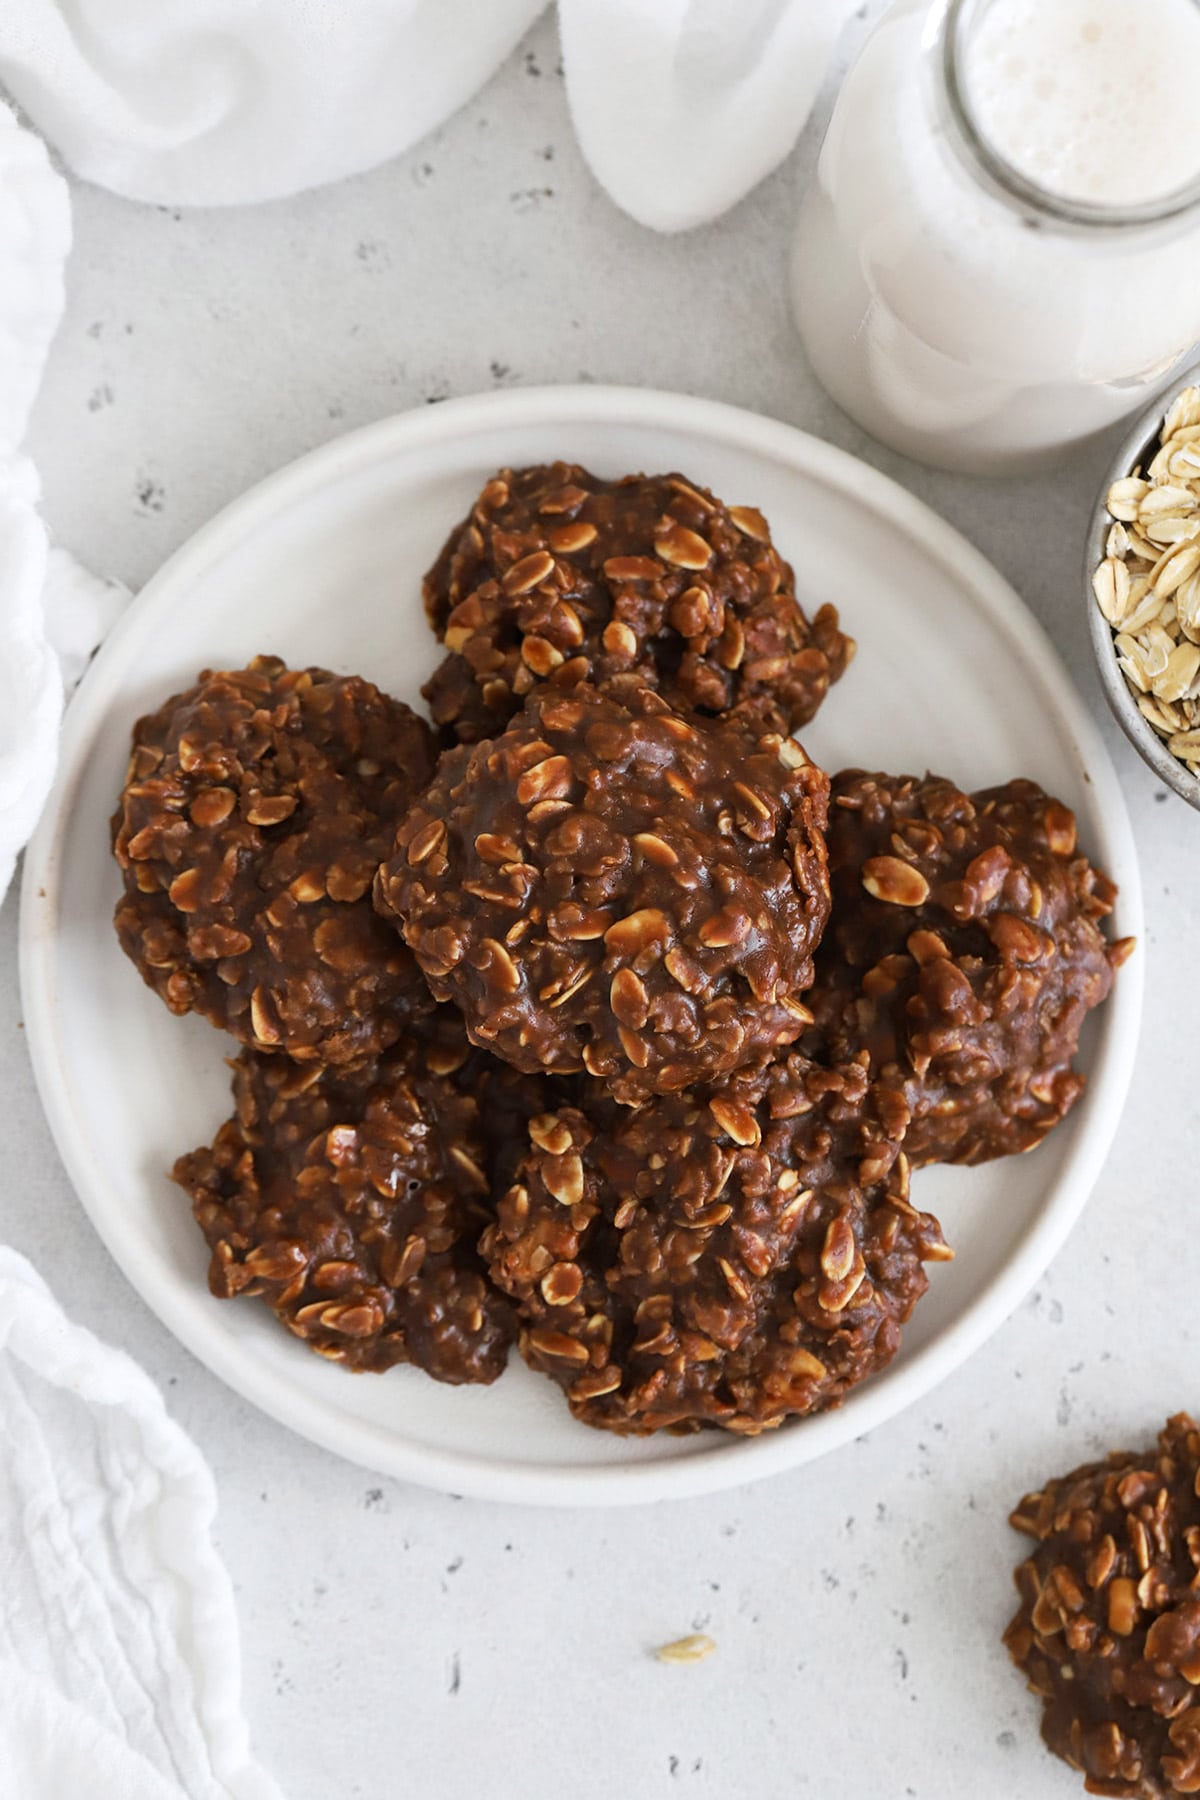 A plate full of gluten-free chocolate peanut butter no-bake cookies